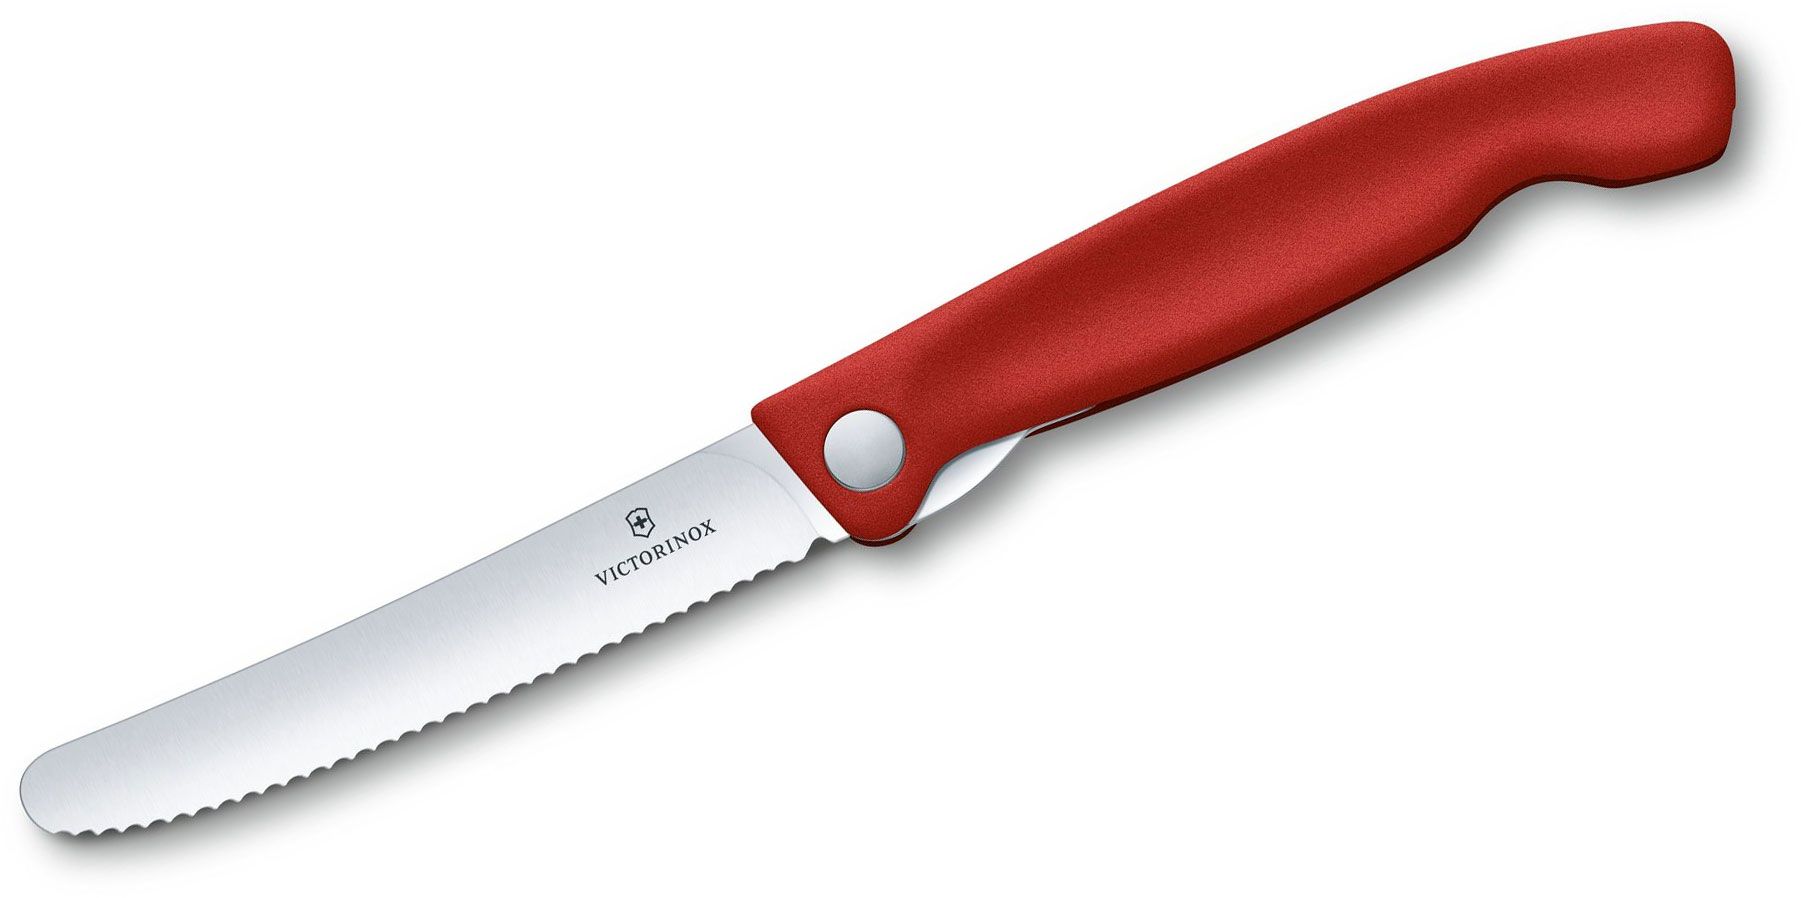 Swiss Classic 4.3 Foldable Serrated Paring Knife by Victorinox at